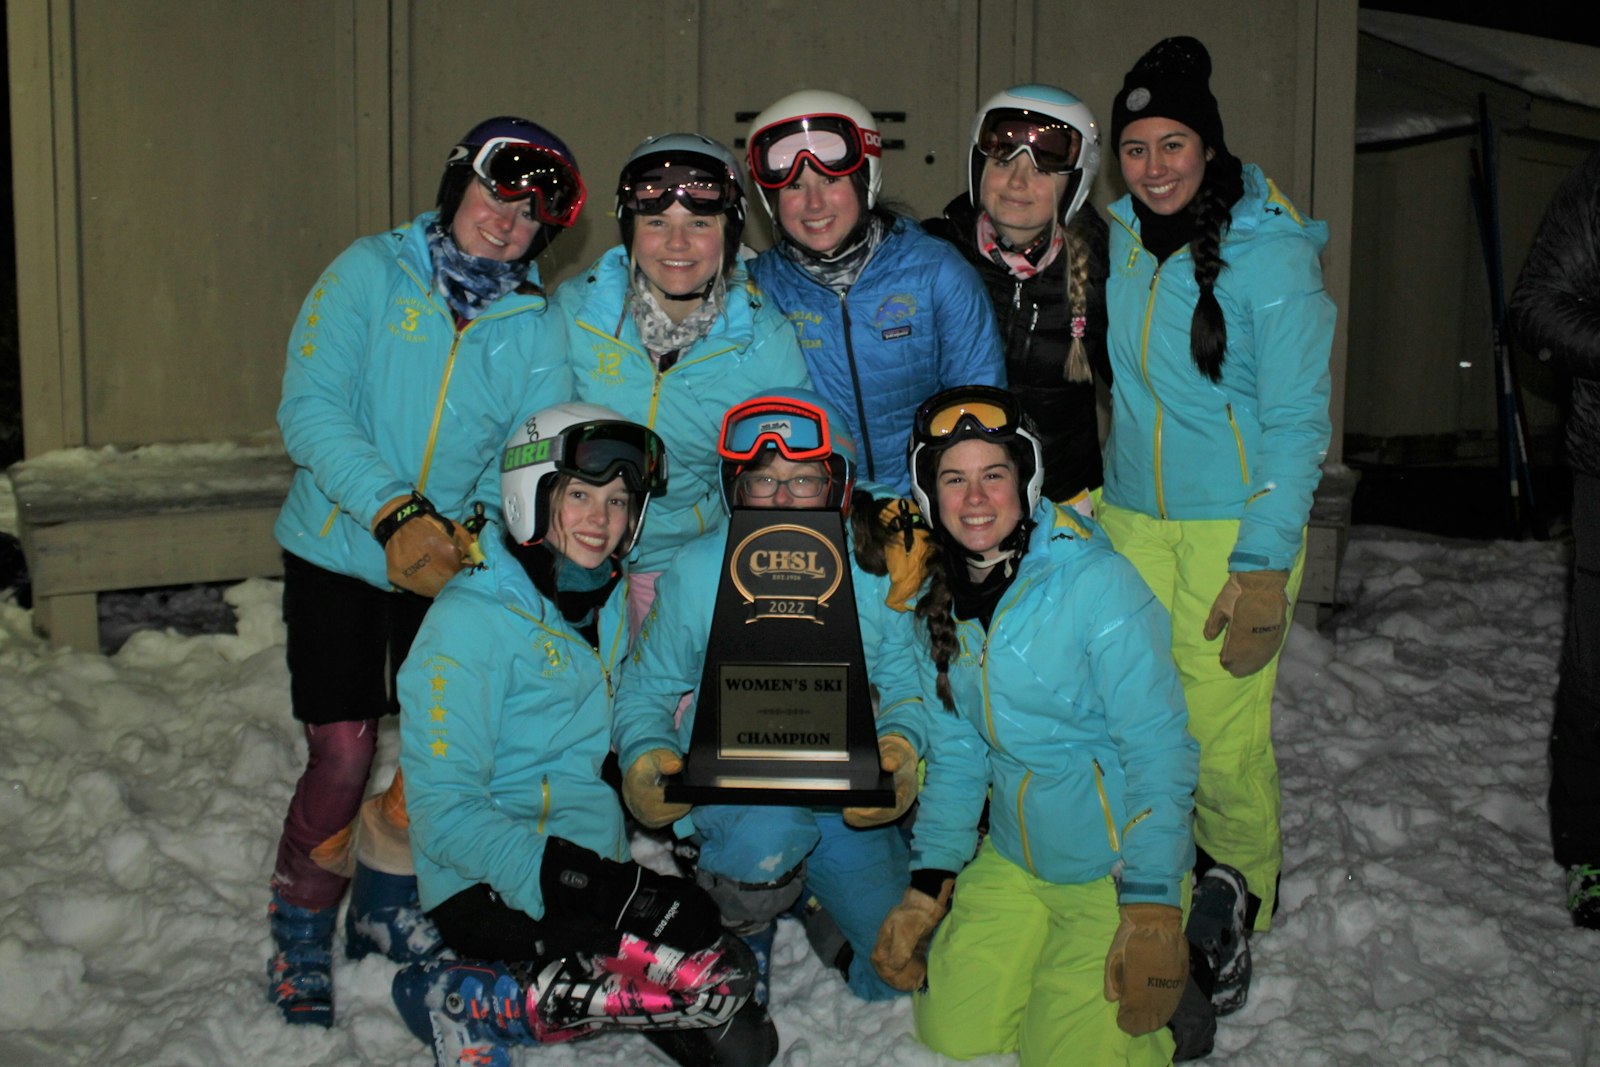 Birmingham Marian won the Catholic League girls’ team title by a slim margin over Farmington Hills Mercy. Freshman Emma Borgula, holding the trophy, finished first in the giant slalom and was runner-up in the slalom.